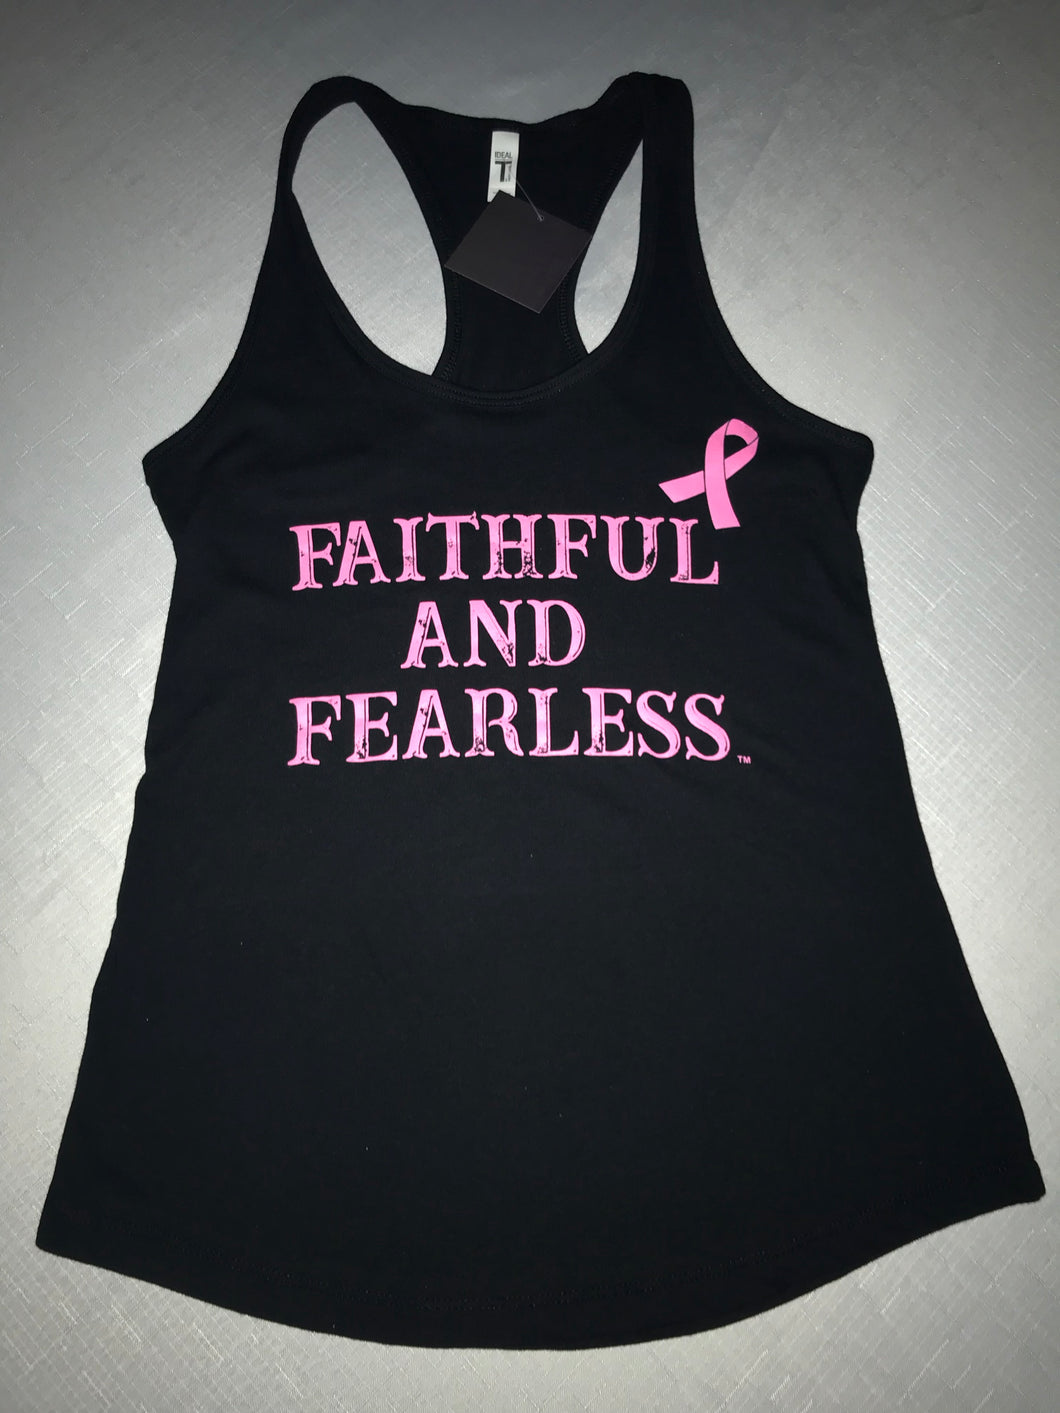 FAITHFUL AND FEARLESS LADIES LIMITED EDITION PINK RIBBON BREAST CANCER AWARENESS RACERBACK BLACK TANK TOP